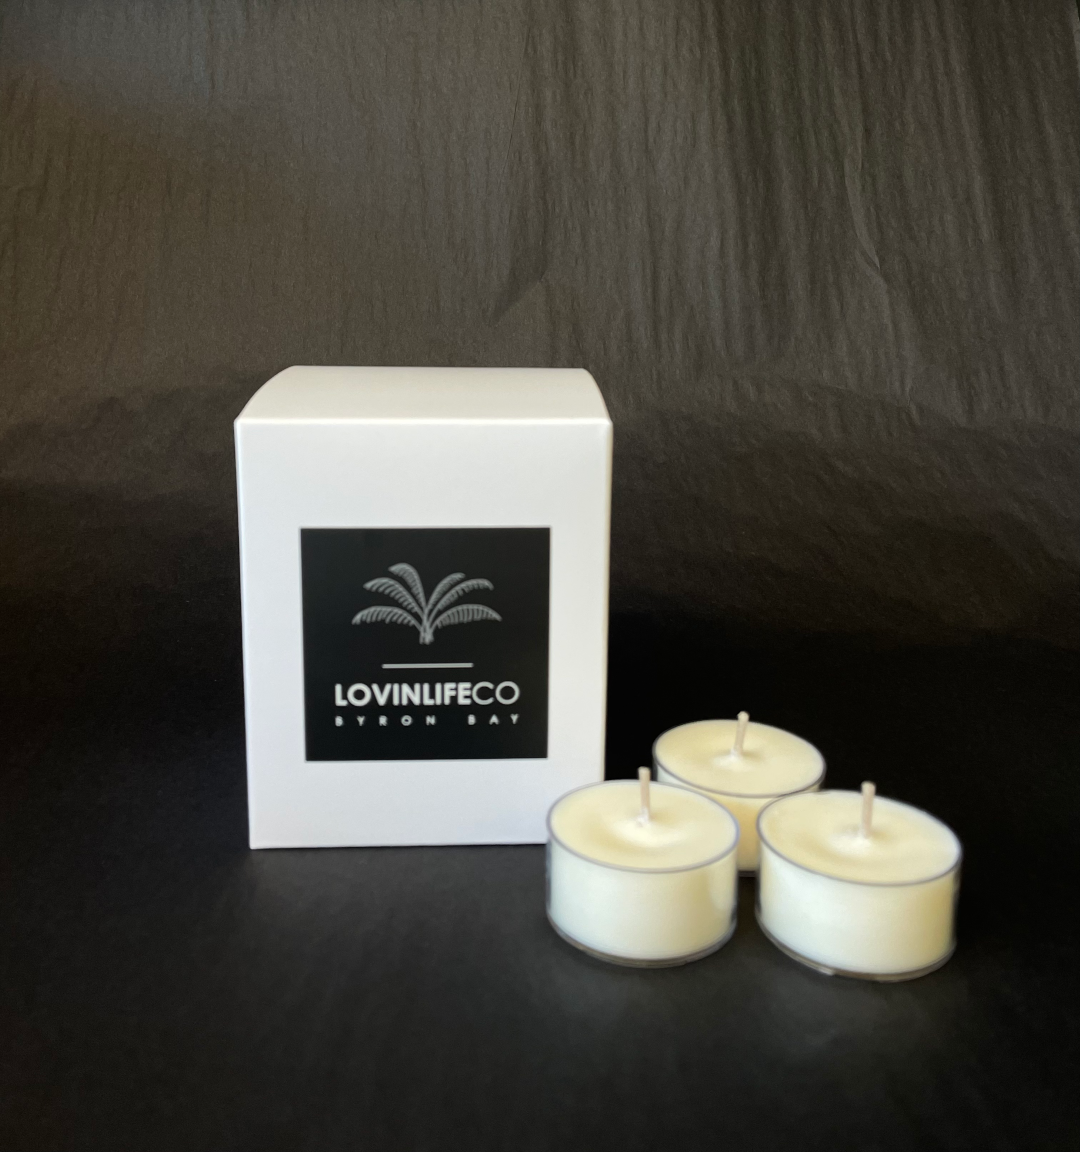 LOVINLIFE Co Byron Bay Signature Range Candles - pure natural unscented soy wax tea light candles - box of 12 pictured with 3 tealight candles in clear recyclable holders - available in our LOVINLIFE Co Homewares Store in Habitat Village in Byron Bay - for all your gifts, candles and interior decorating needs